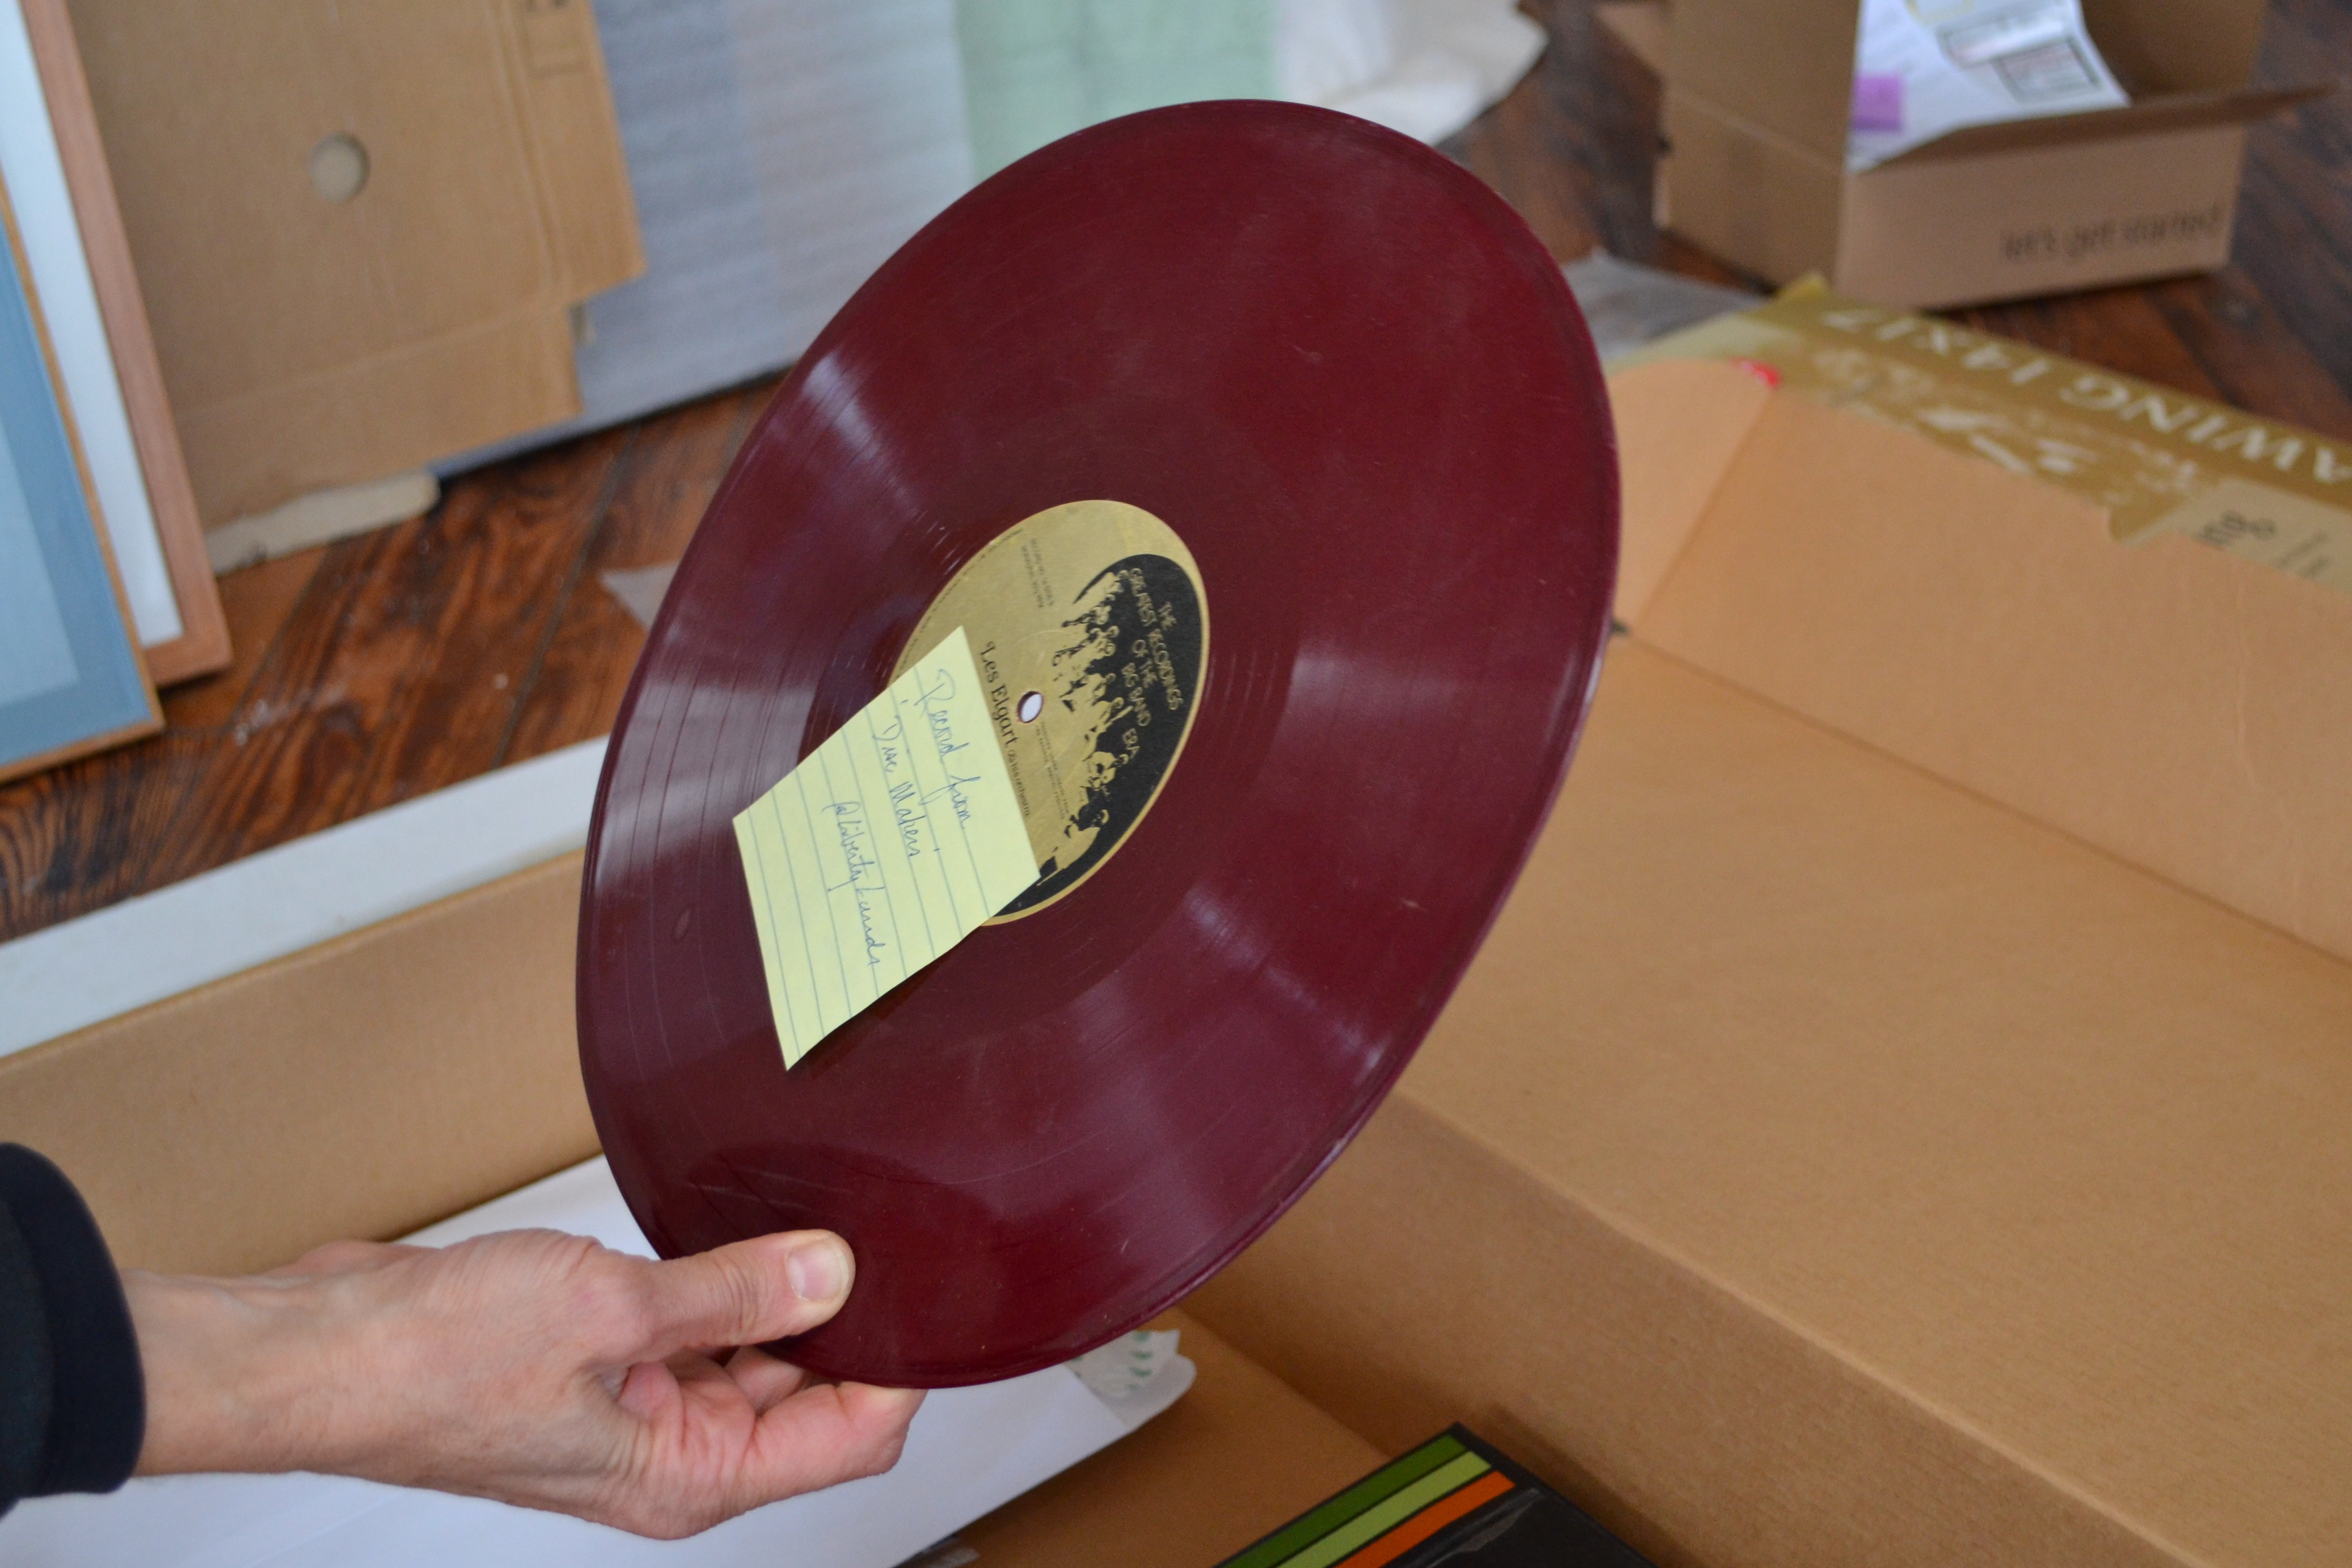 While building Liberty Lands Park, neighbors found pits of red vinyl records made by Disc Makers 